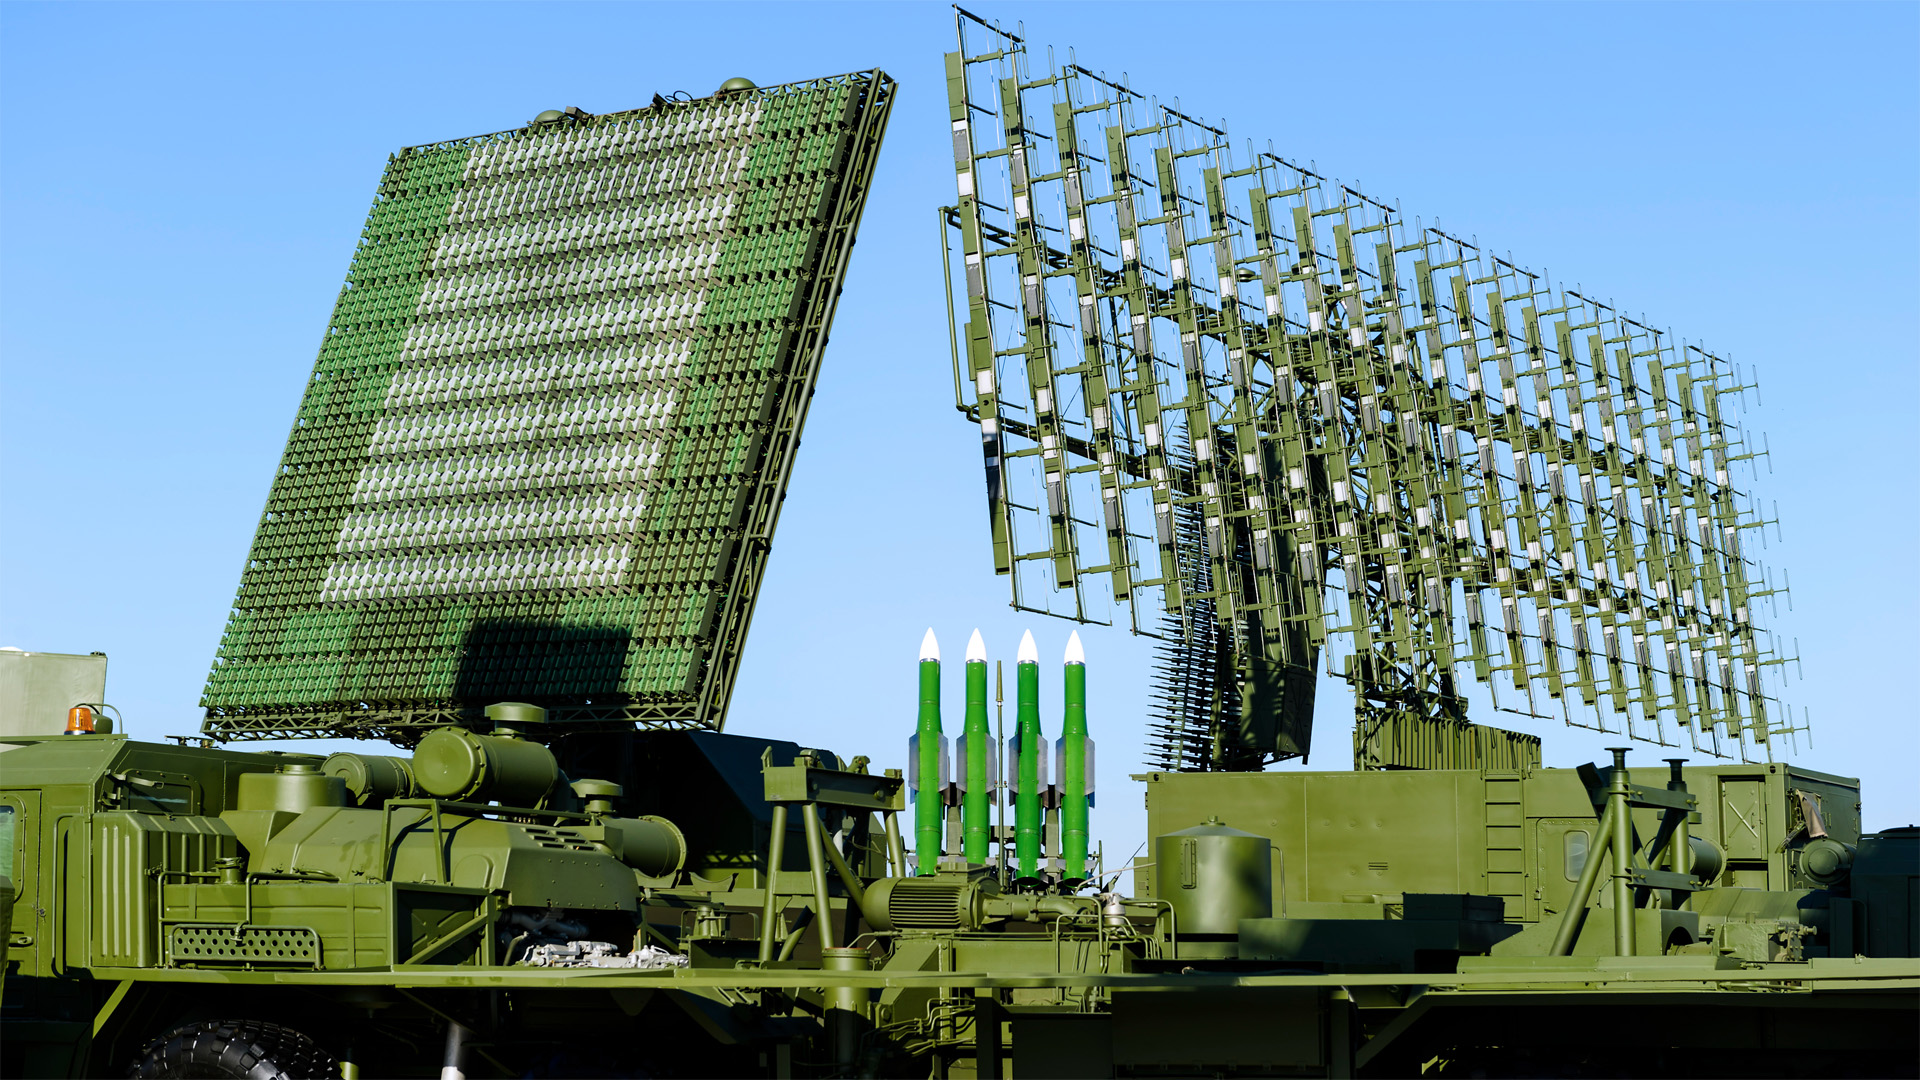 Air defense radars of military mobile antiaircraft systems in green color and ballistic rocket launcher with four cruise missiles in centre of frame, modern army industry image.